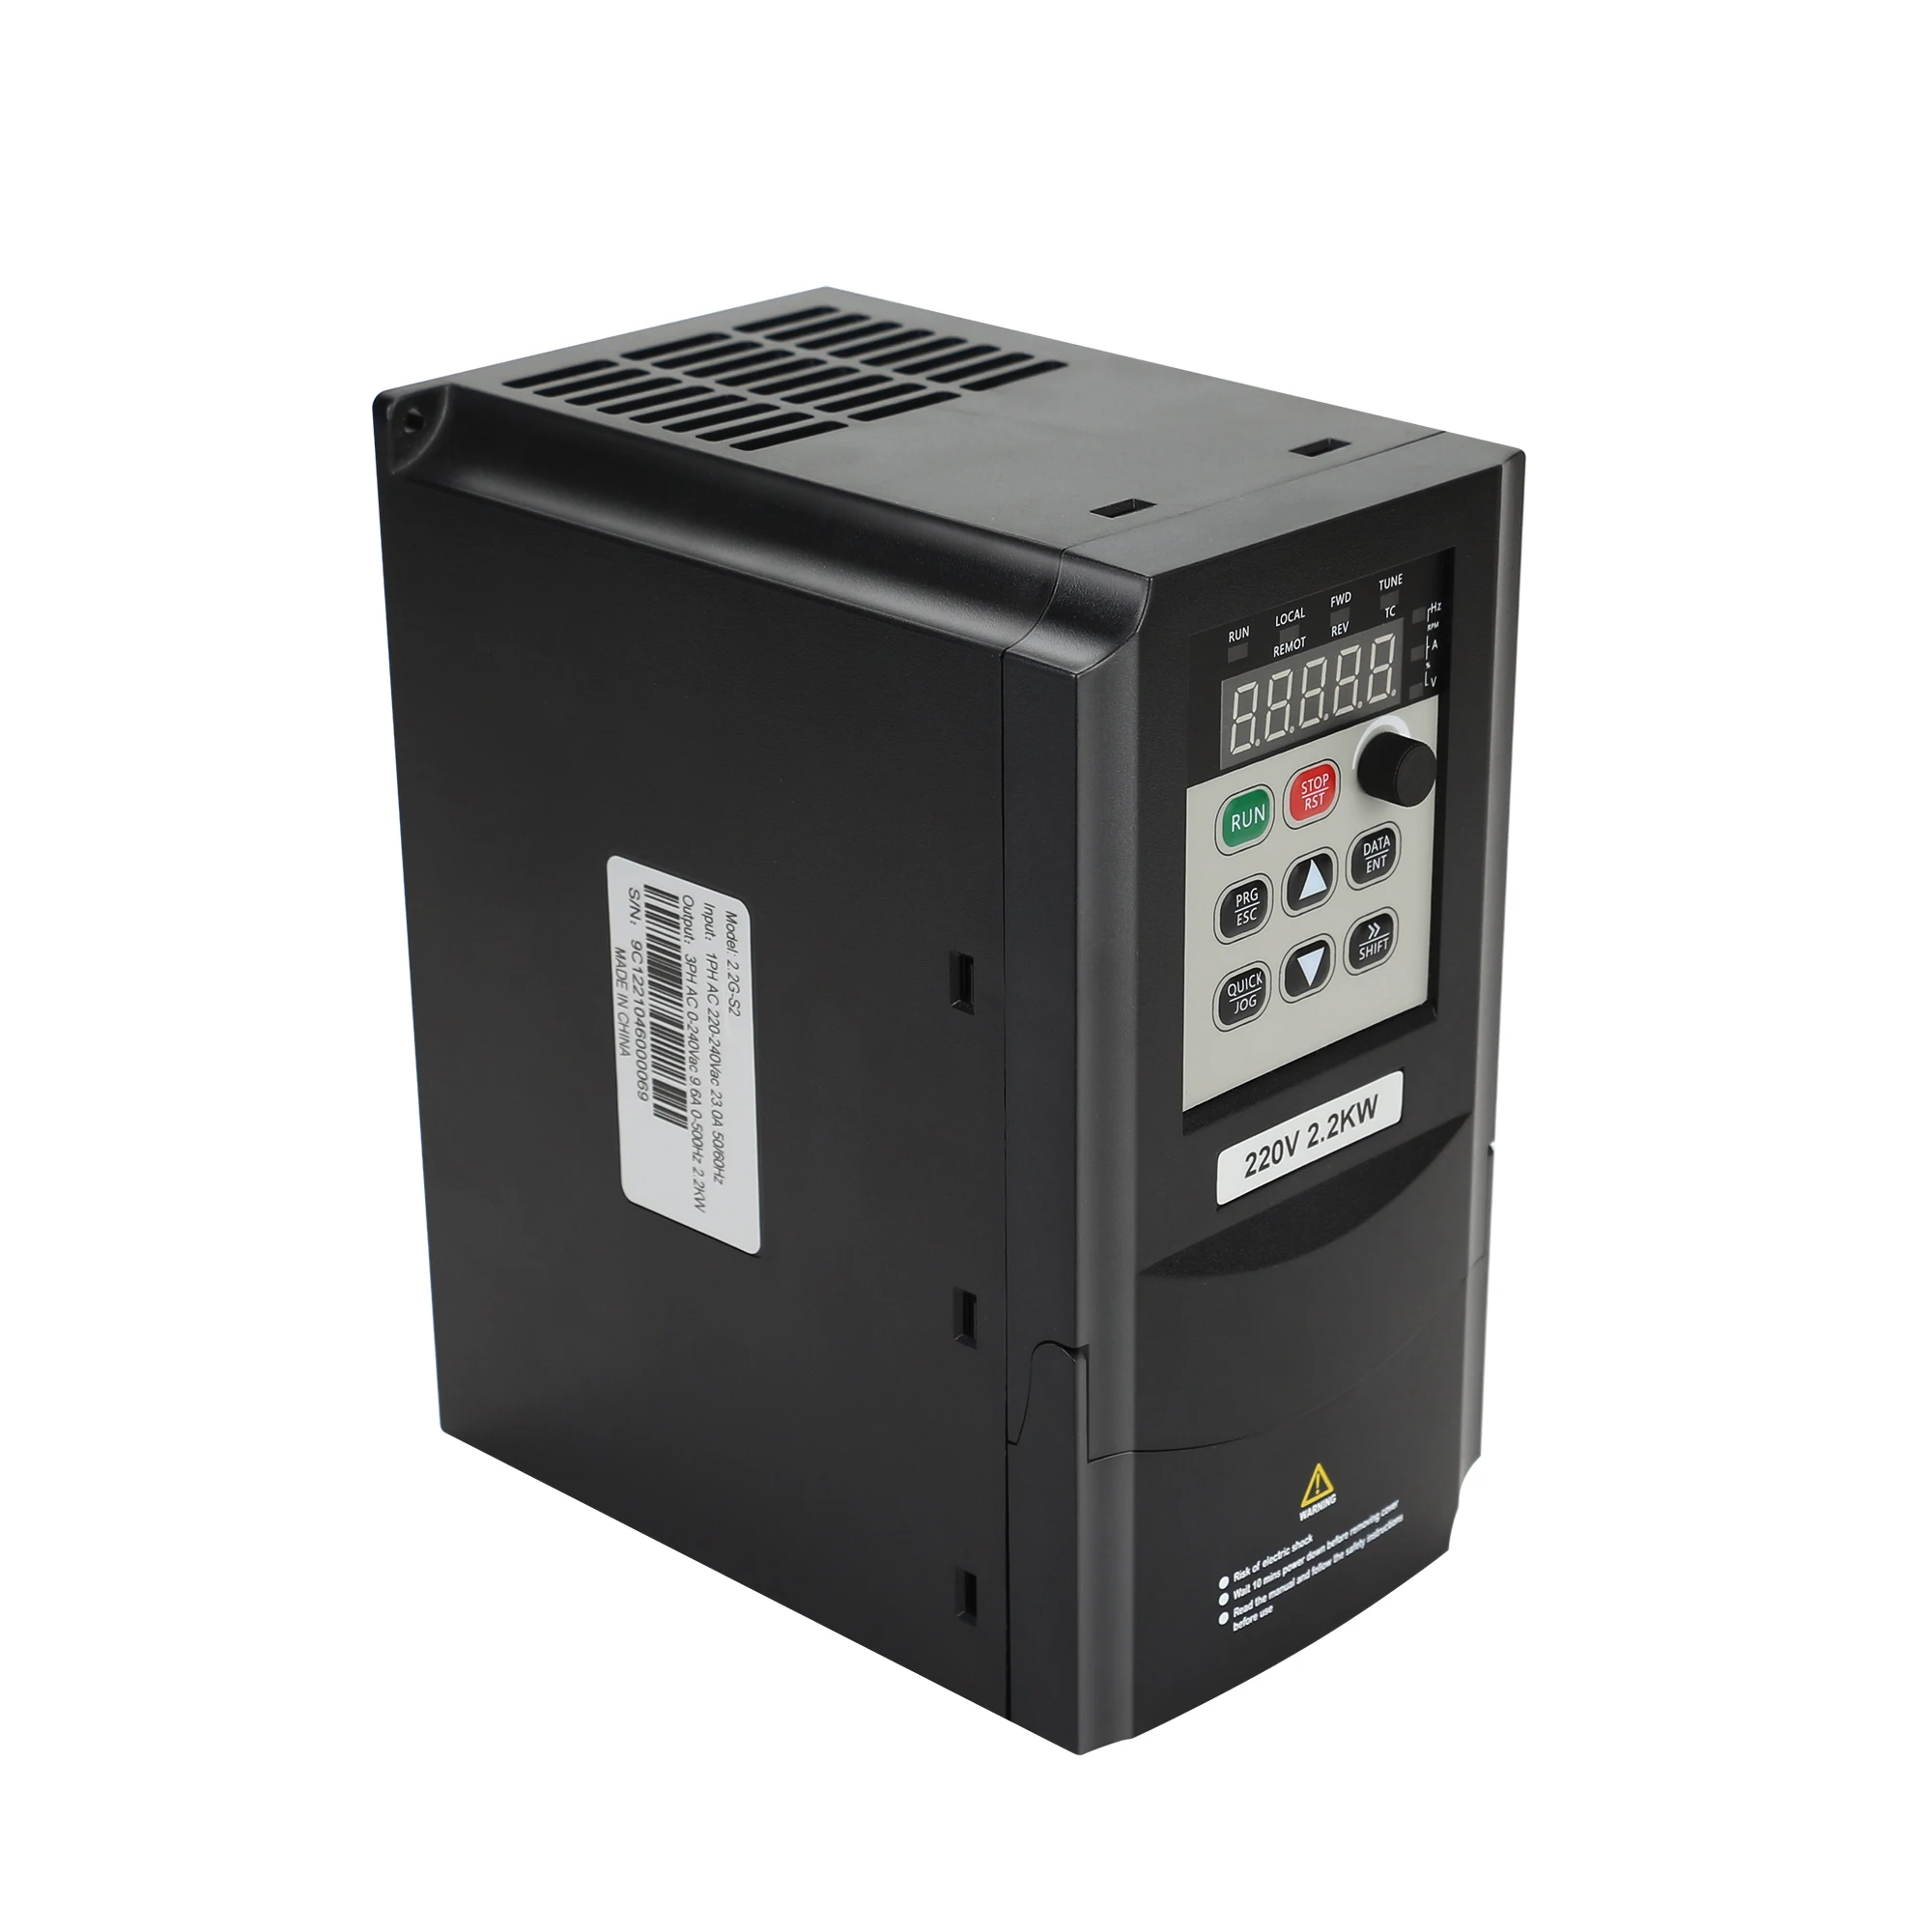 

PowMr Astro 2.2G-S2 Single Phase Frequency Converter Input 1PH AC 220V 2.2KW Output 3HP VFD Variable Drive